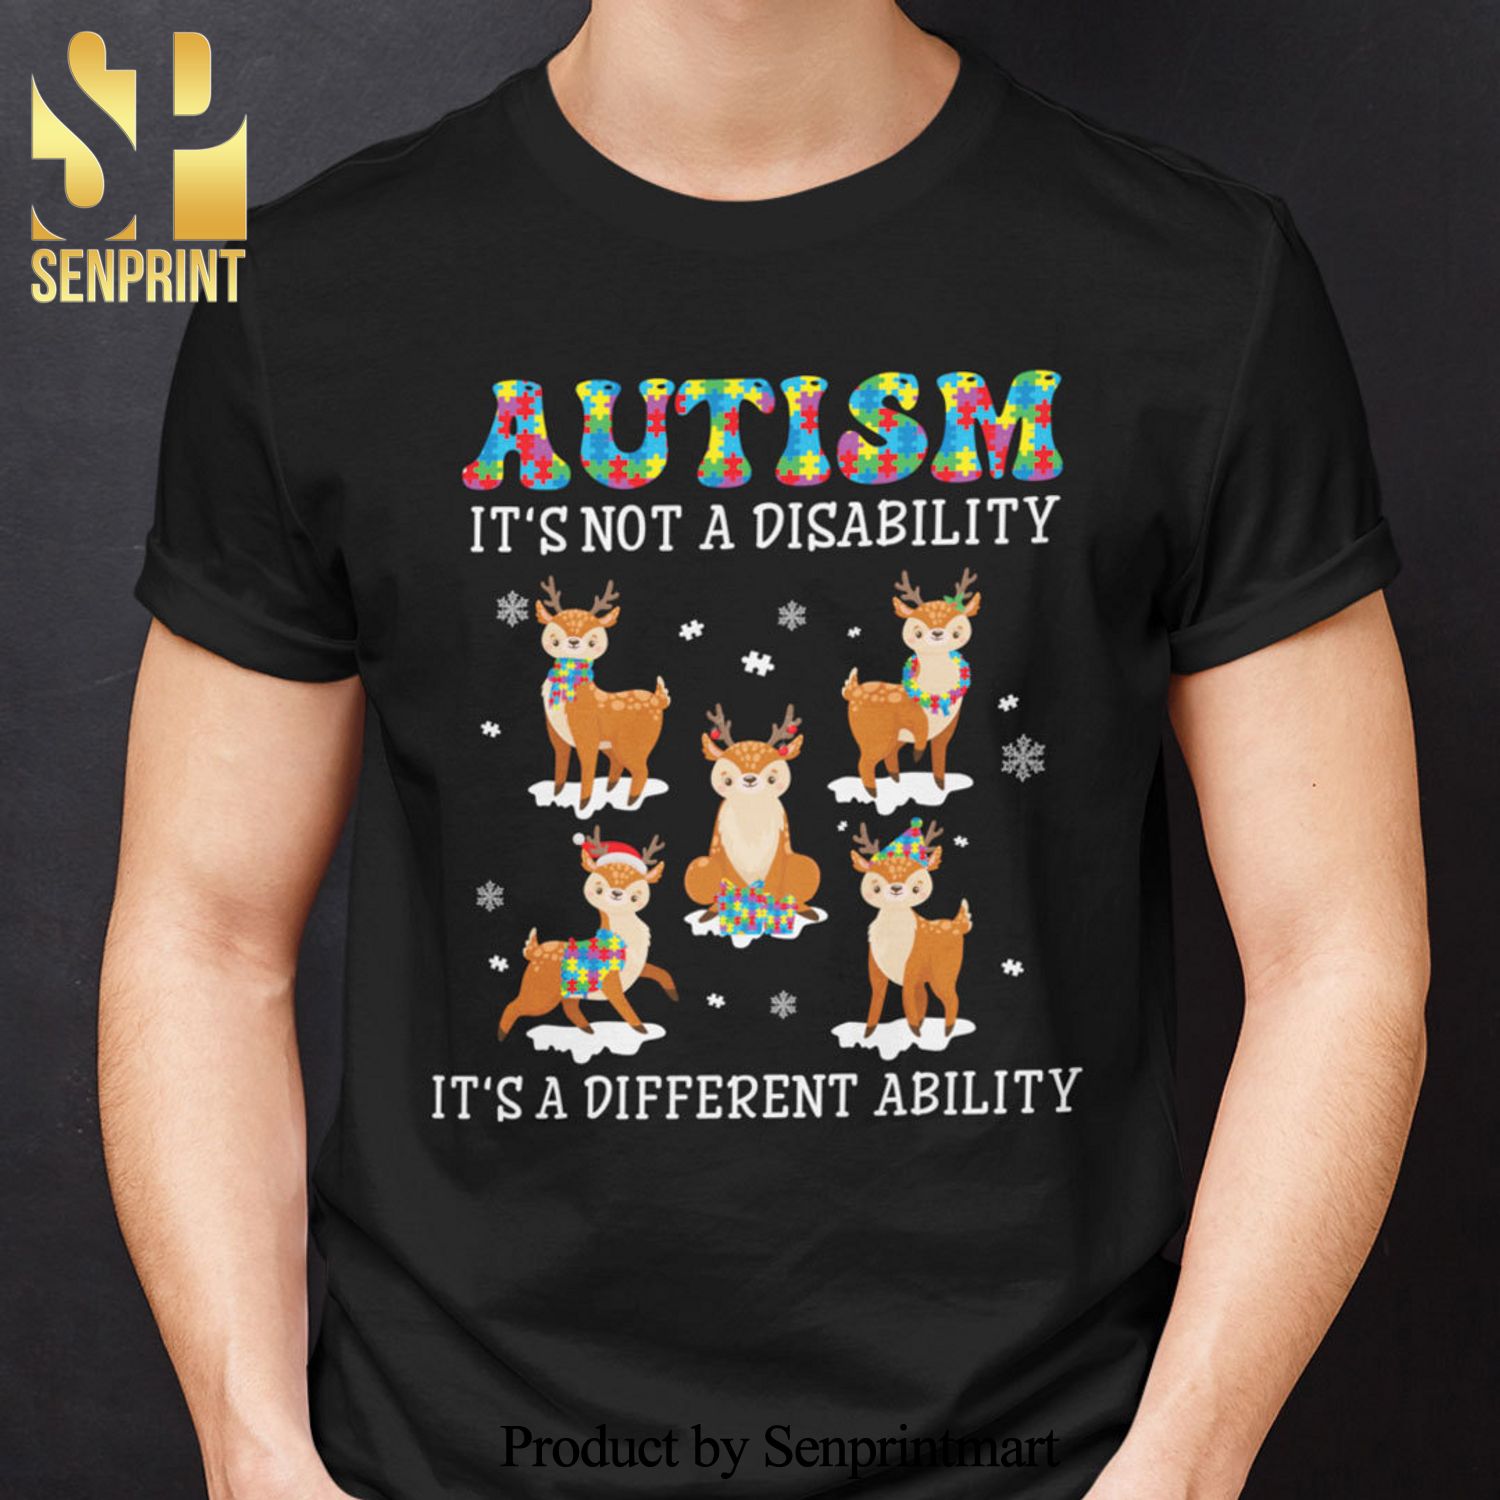 Christmas Autism Christmas Gifts Shirts Autism It’s Not A Disability It’s A Different Ability